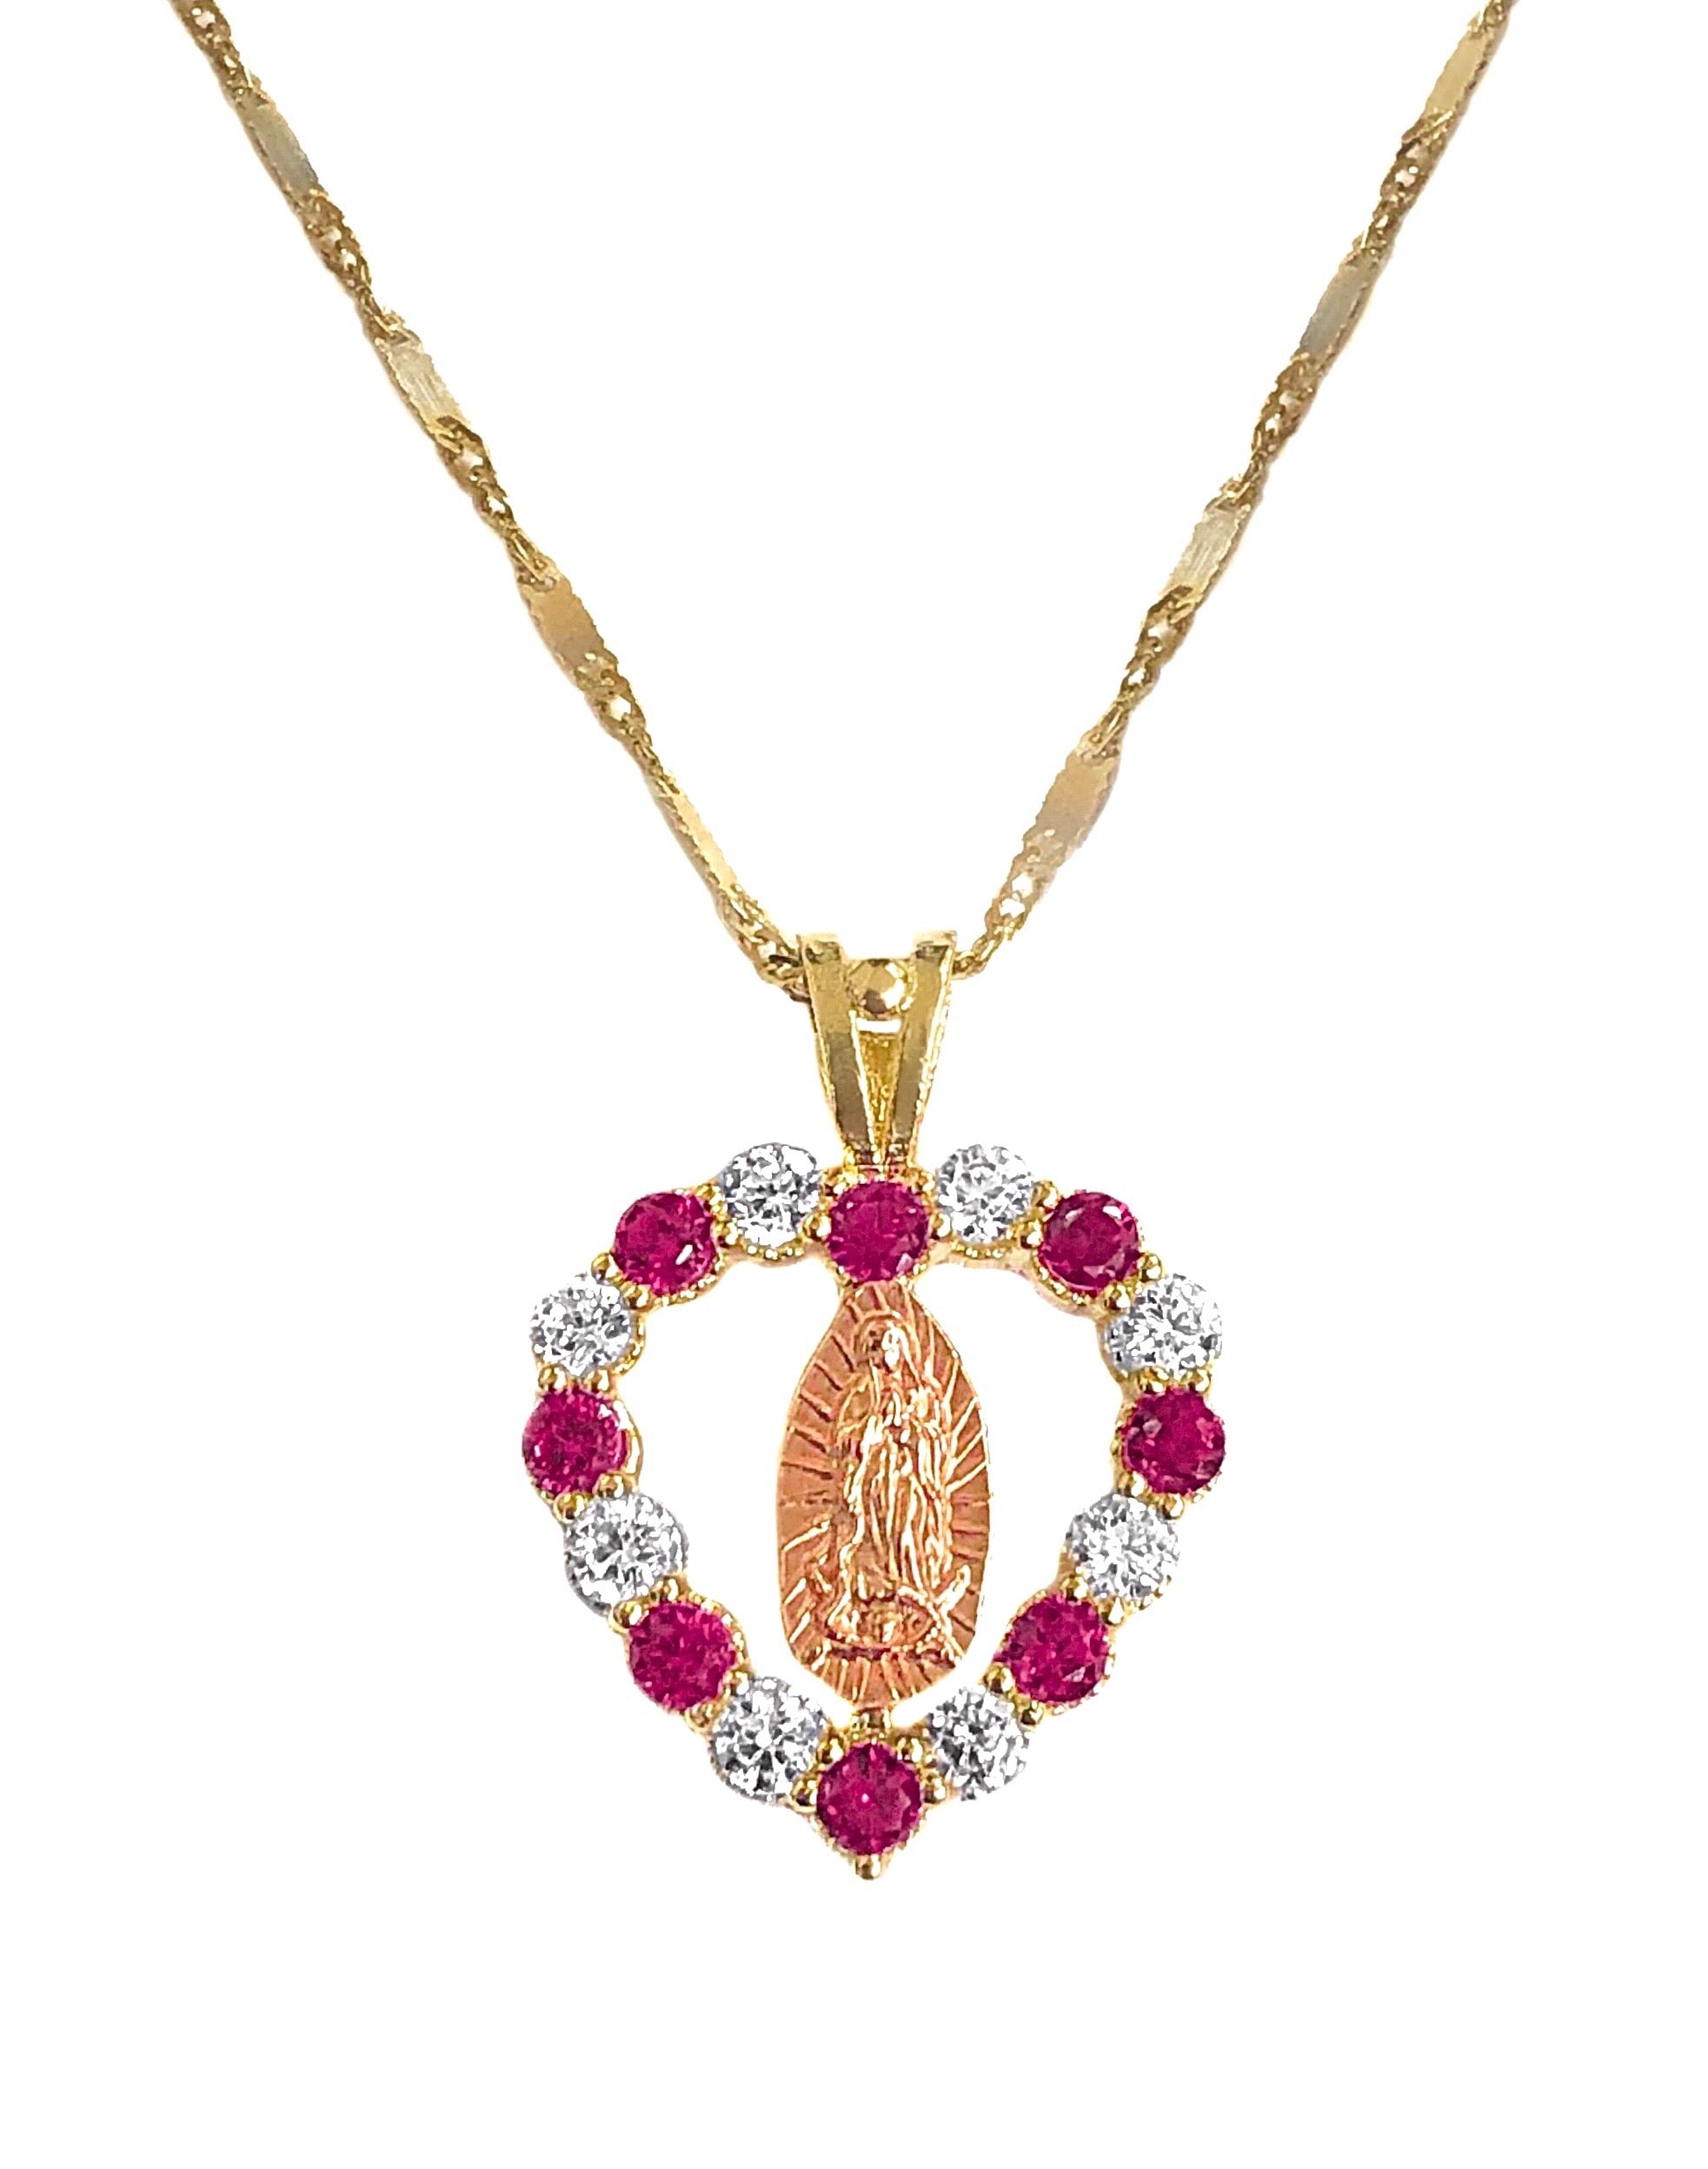 14K YELLOW GOLD HEART BLING VIRGIN MARY NECKLACE